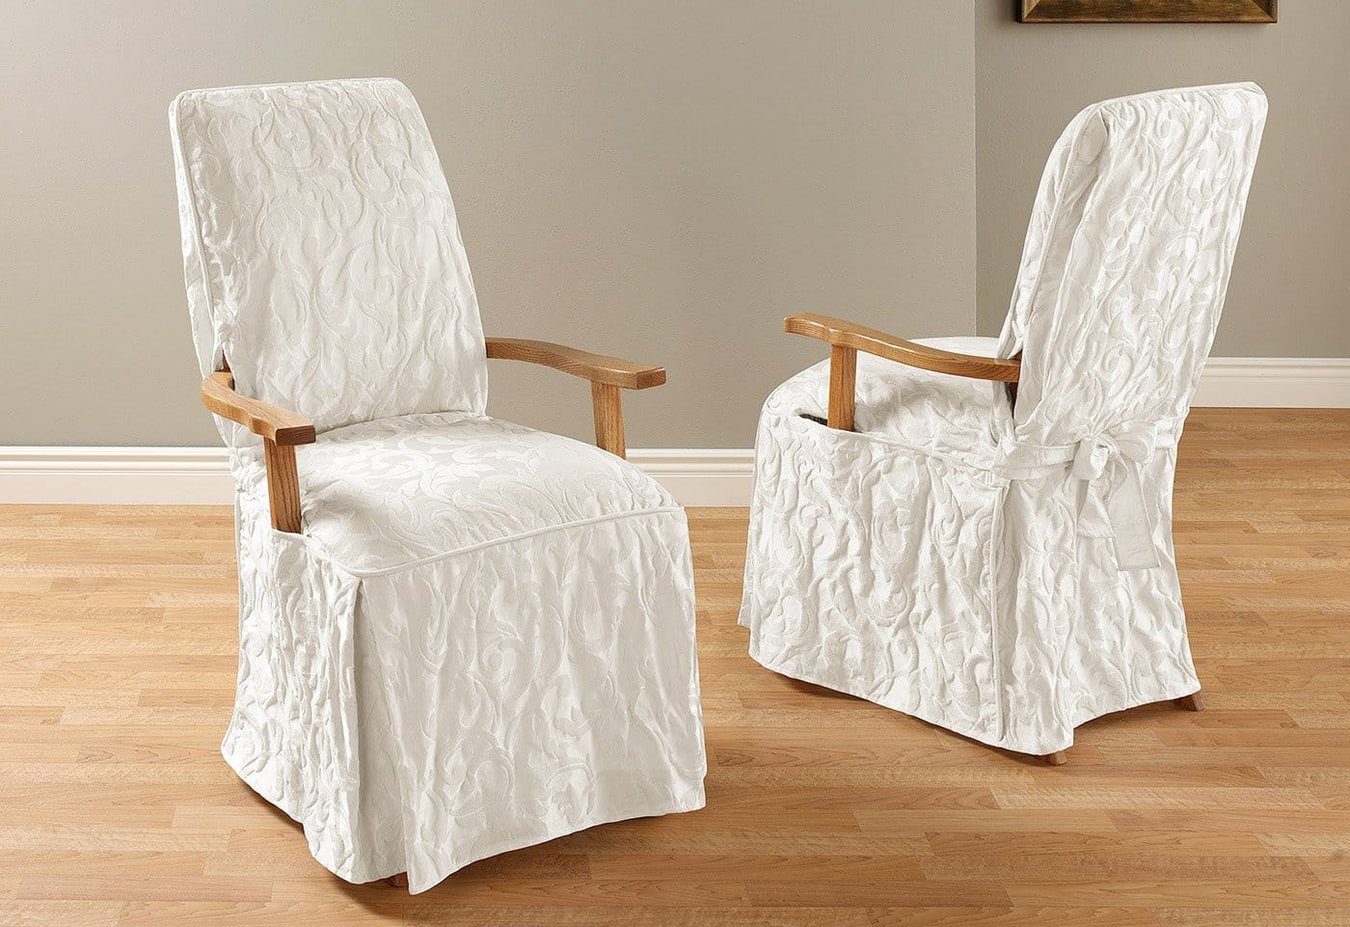 Matelasse Damask Long With Arms Arm Long Dining Chair Slipcover Surefit